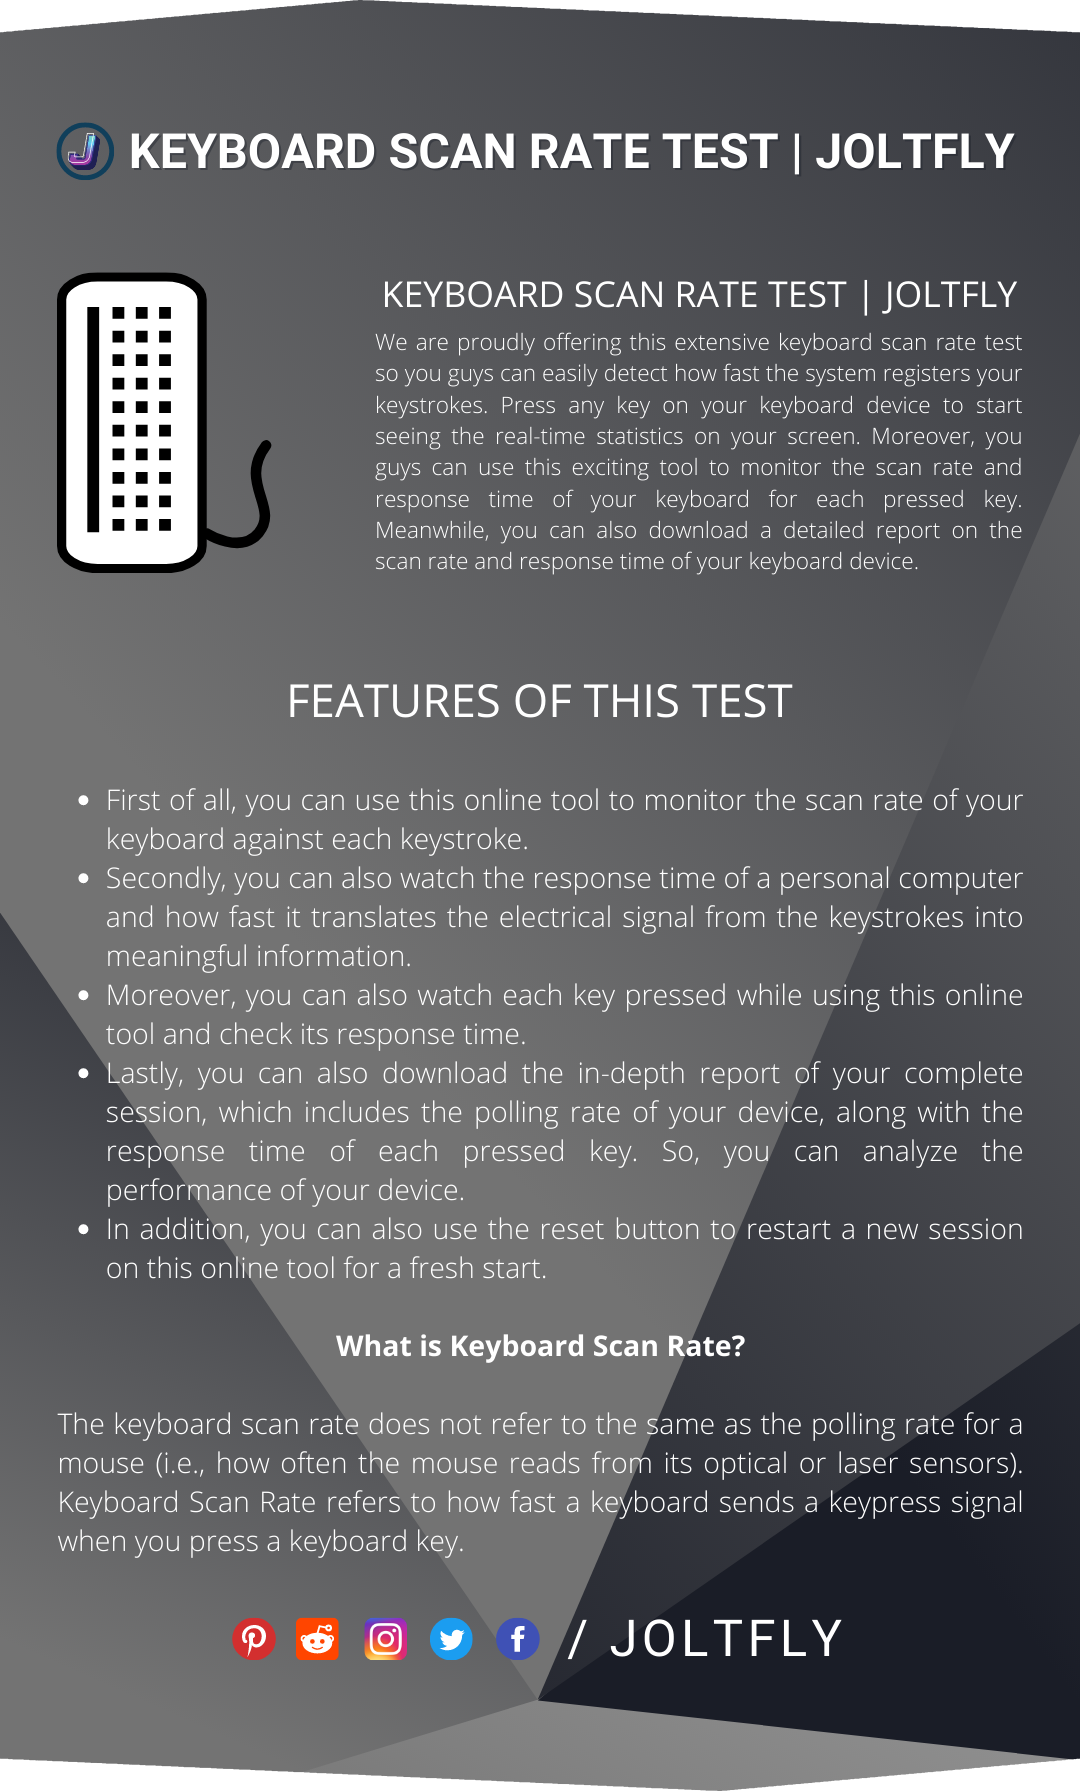 Joltfly - Keyboard Scan Rate Test Features